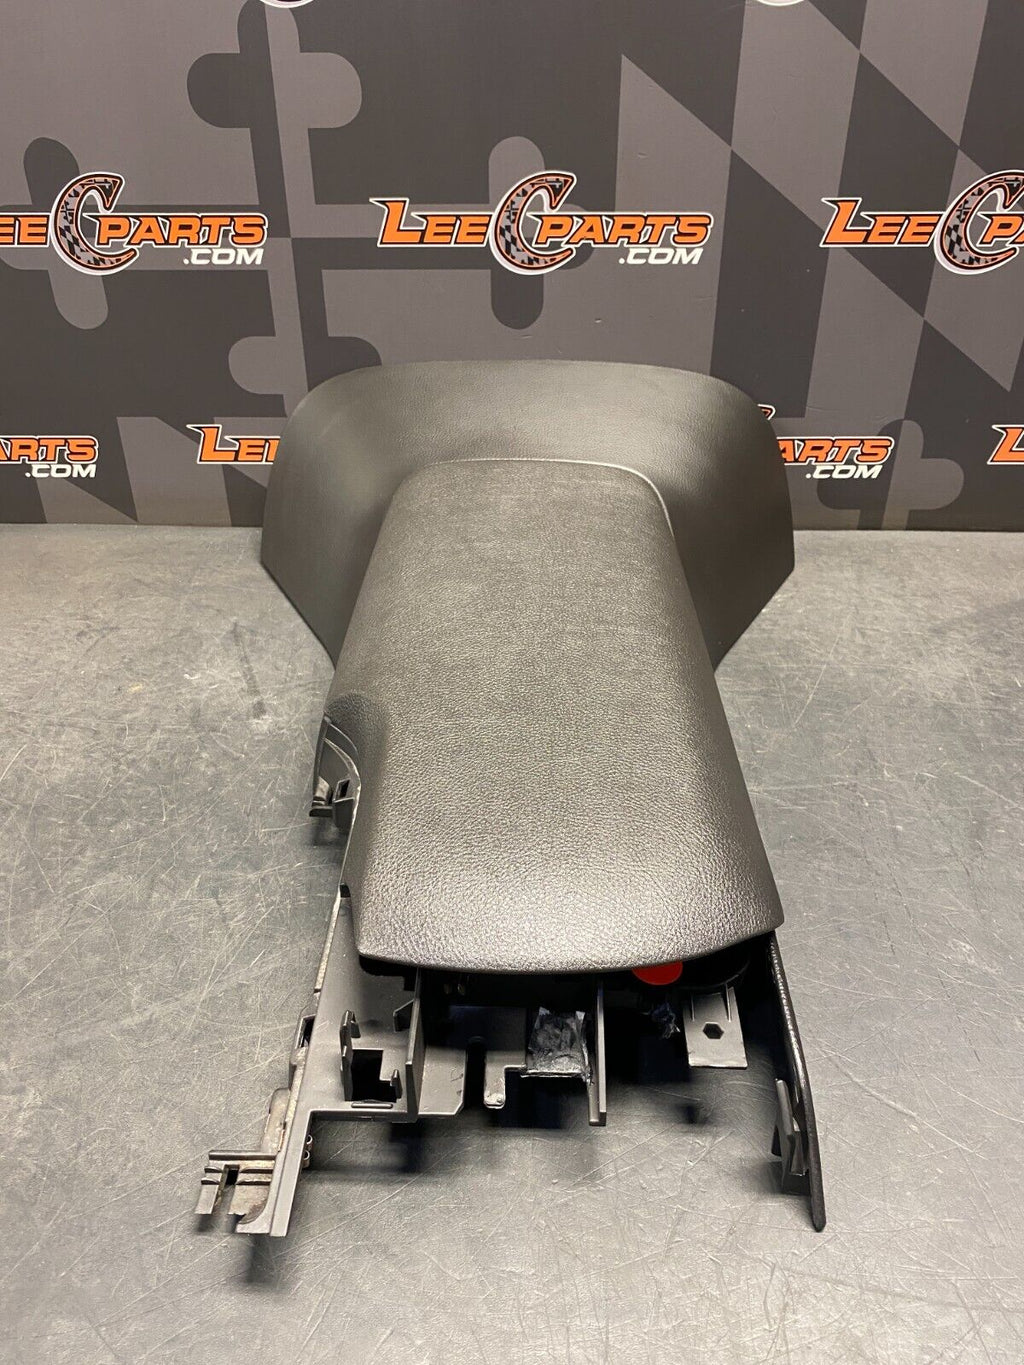 2010 CORVETTE C6 OEM CENTER CONSOLE ARM REST WITH LID USED